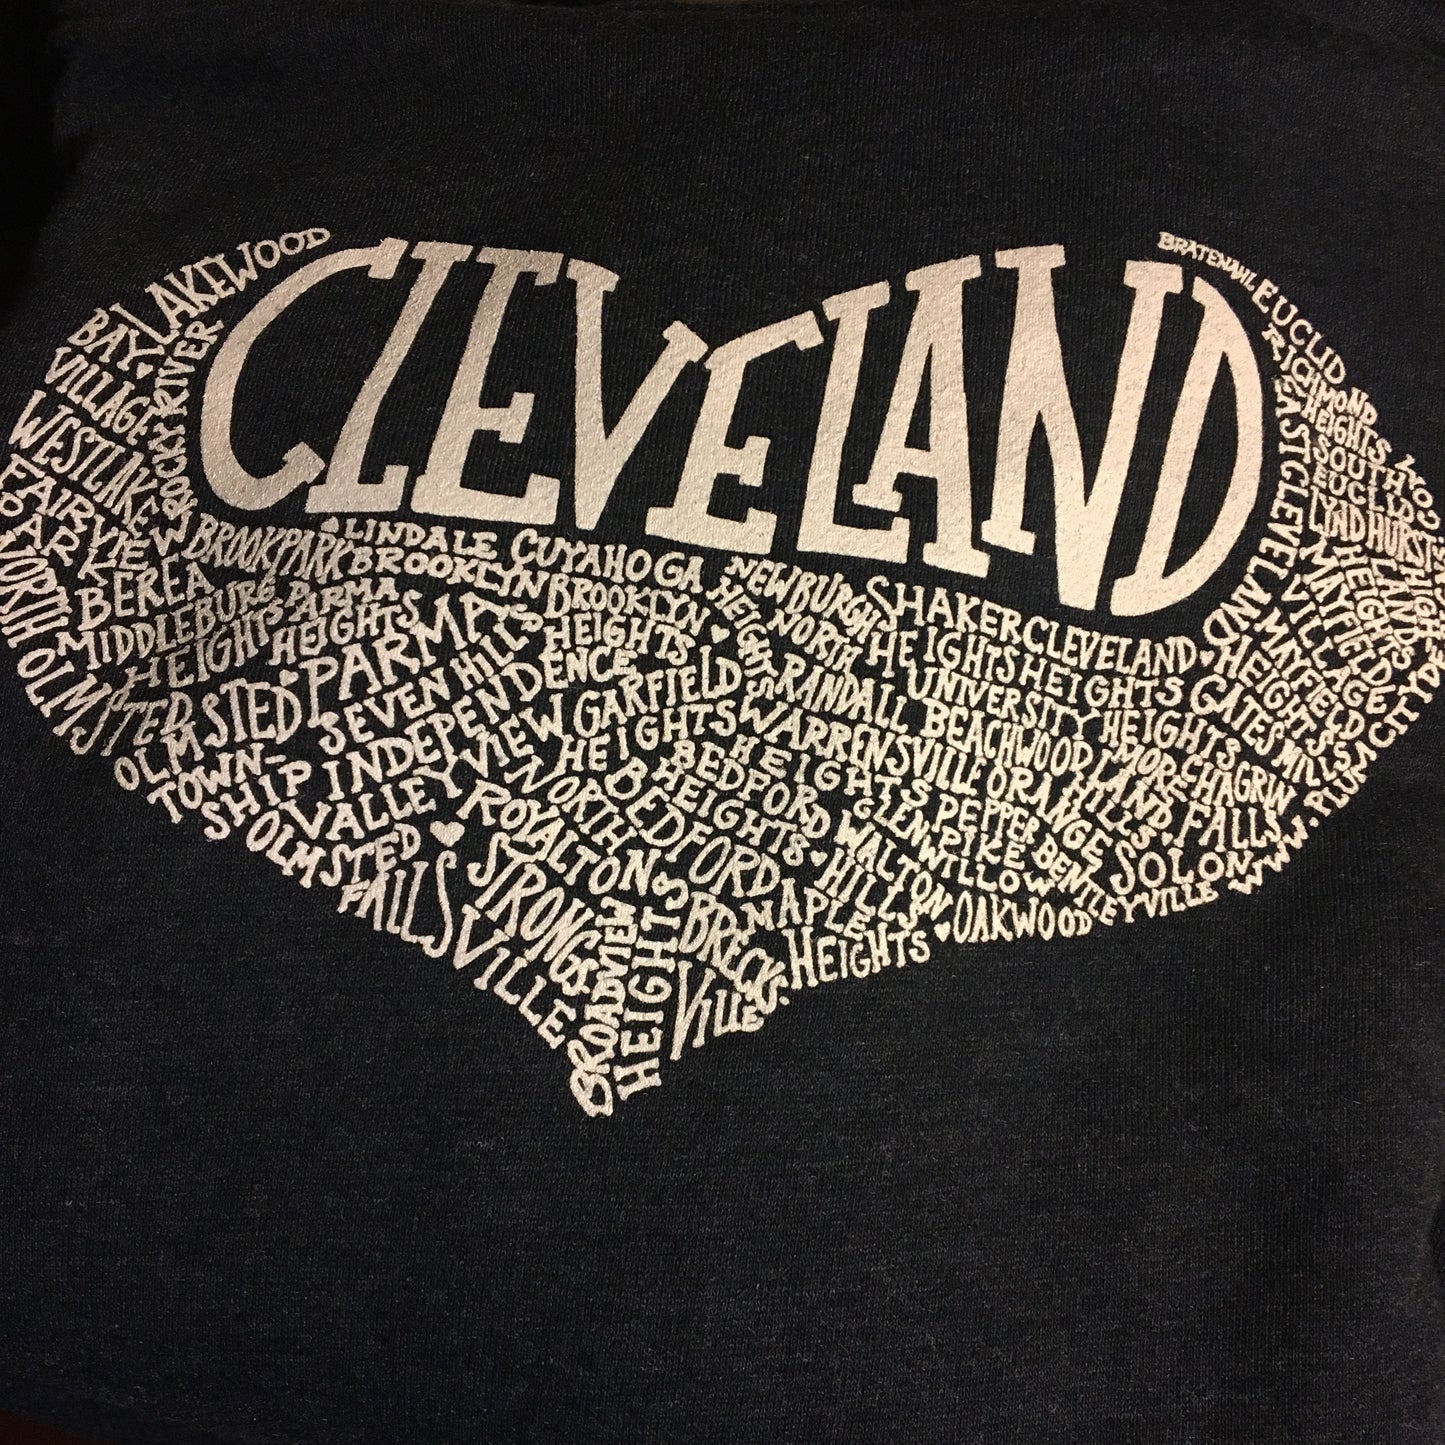 Everybody’s Cleveland cowl-neck hoodie